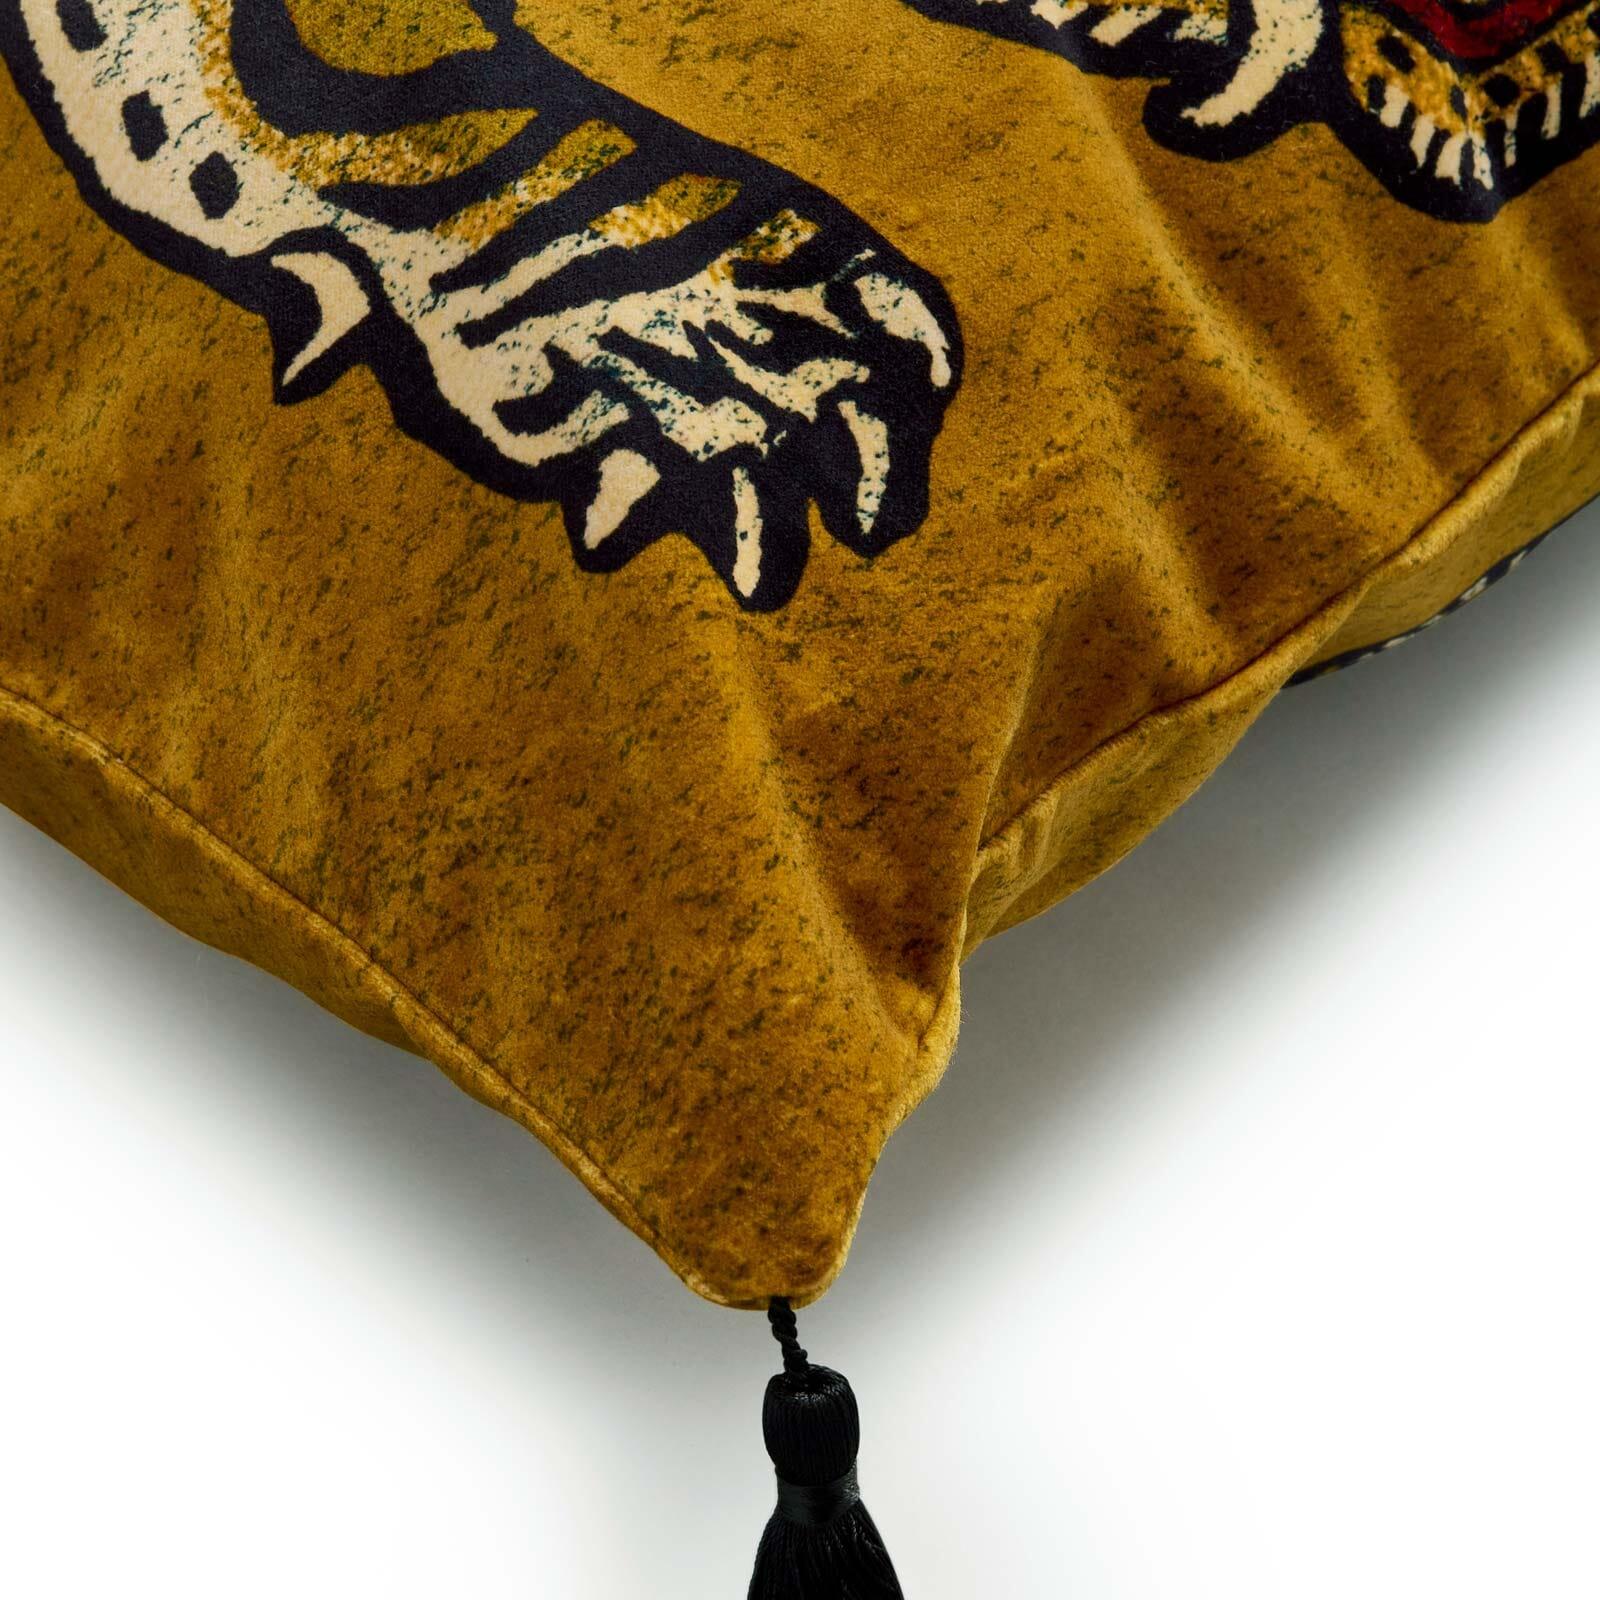 Elevate your sofa from simple to statement with this large gold velvet cushion. Featuring SABER, the Tibetan tiger, this tasselled design will delight animal lovers and interiors enthusiasts alike. House of Hackney donates a portion of the proceeds